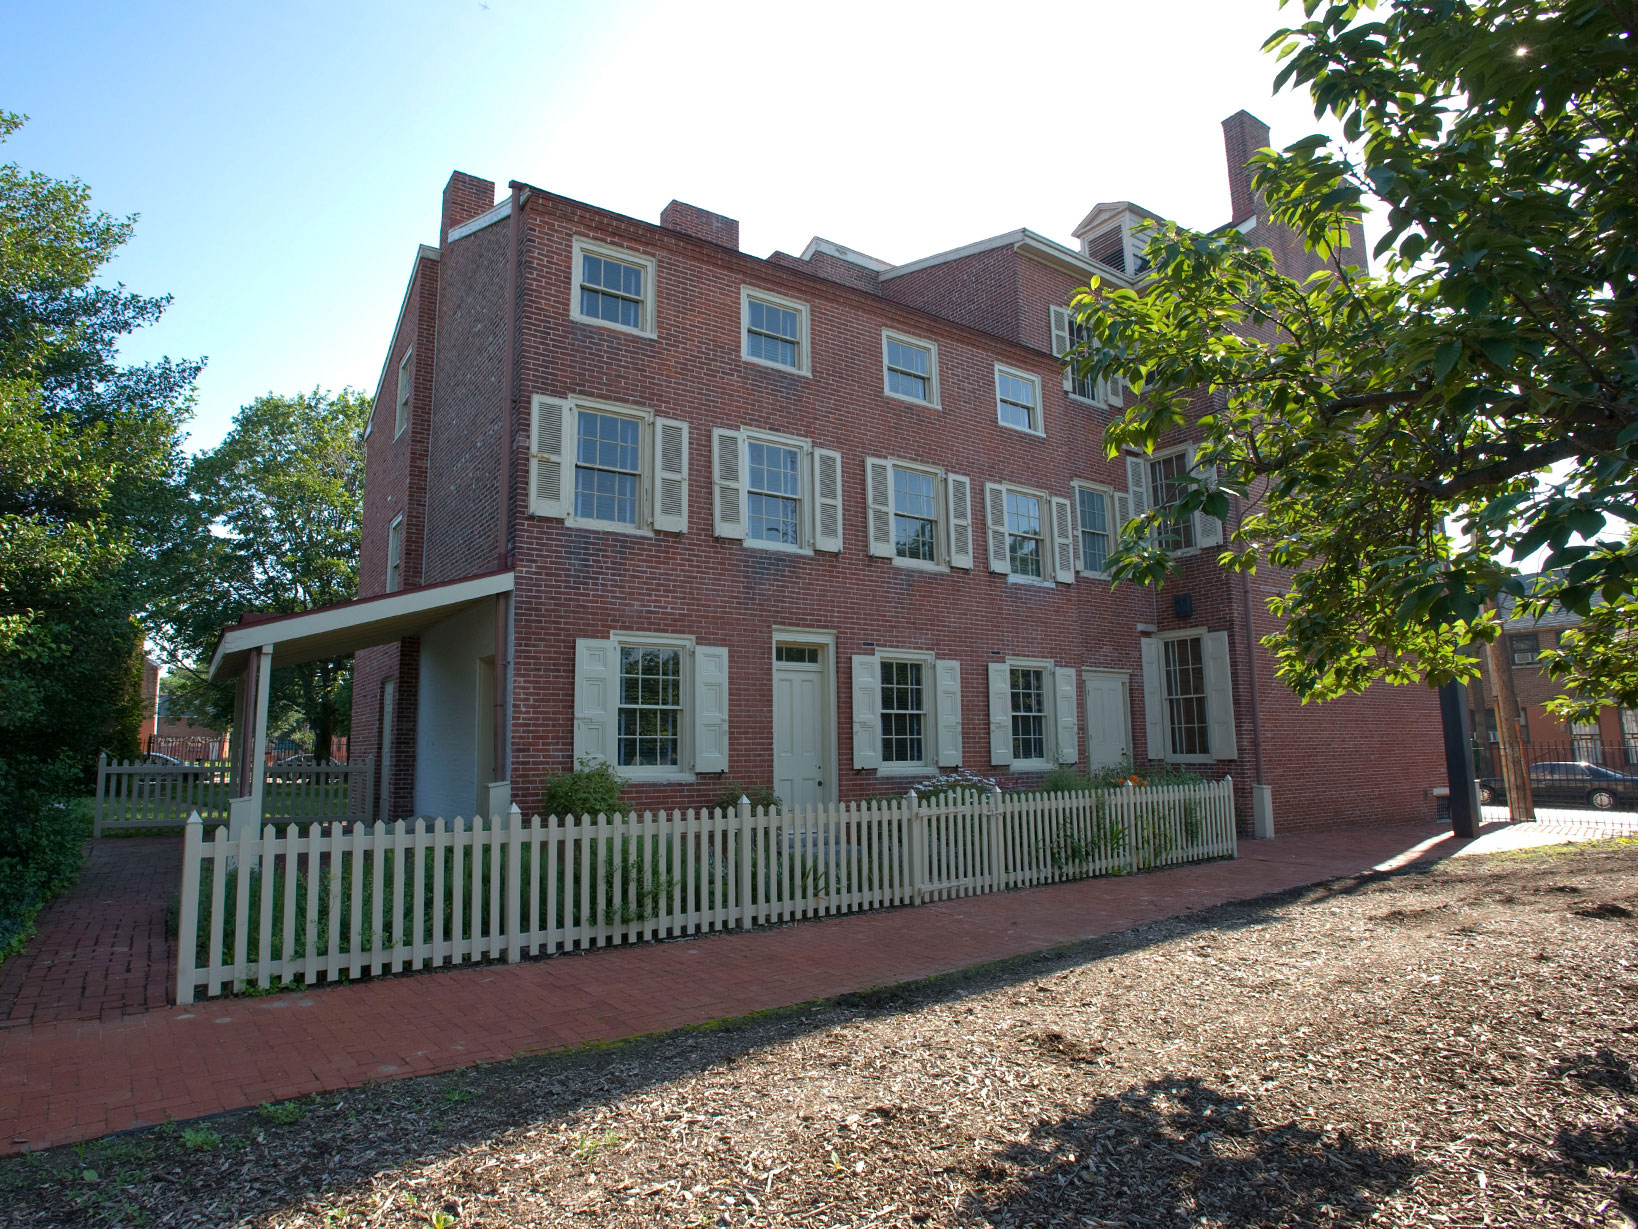 Color photo of a rectangular three story brick home with rows of windows on each floor.